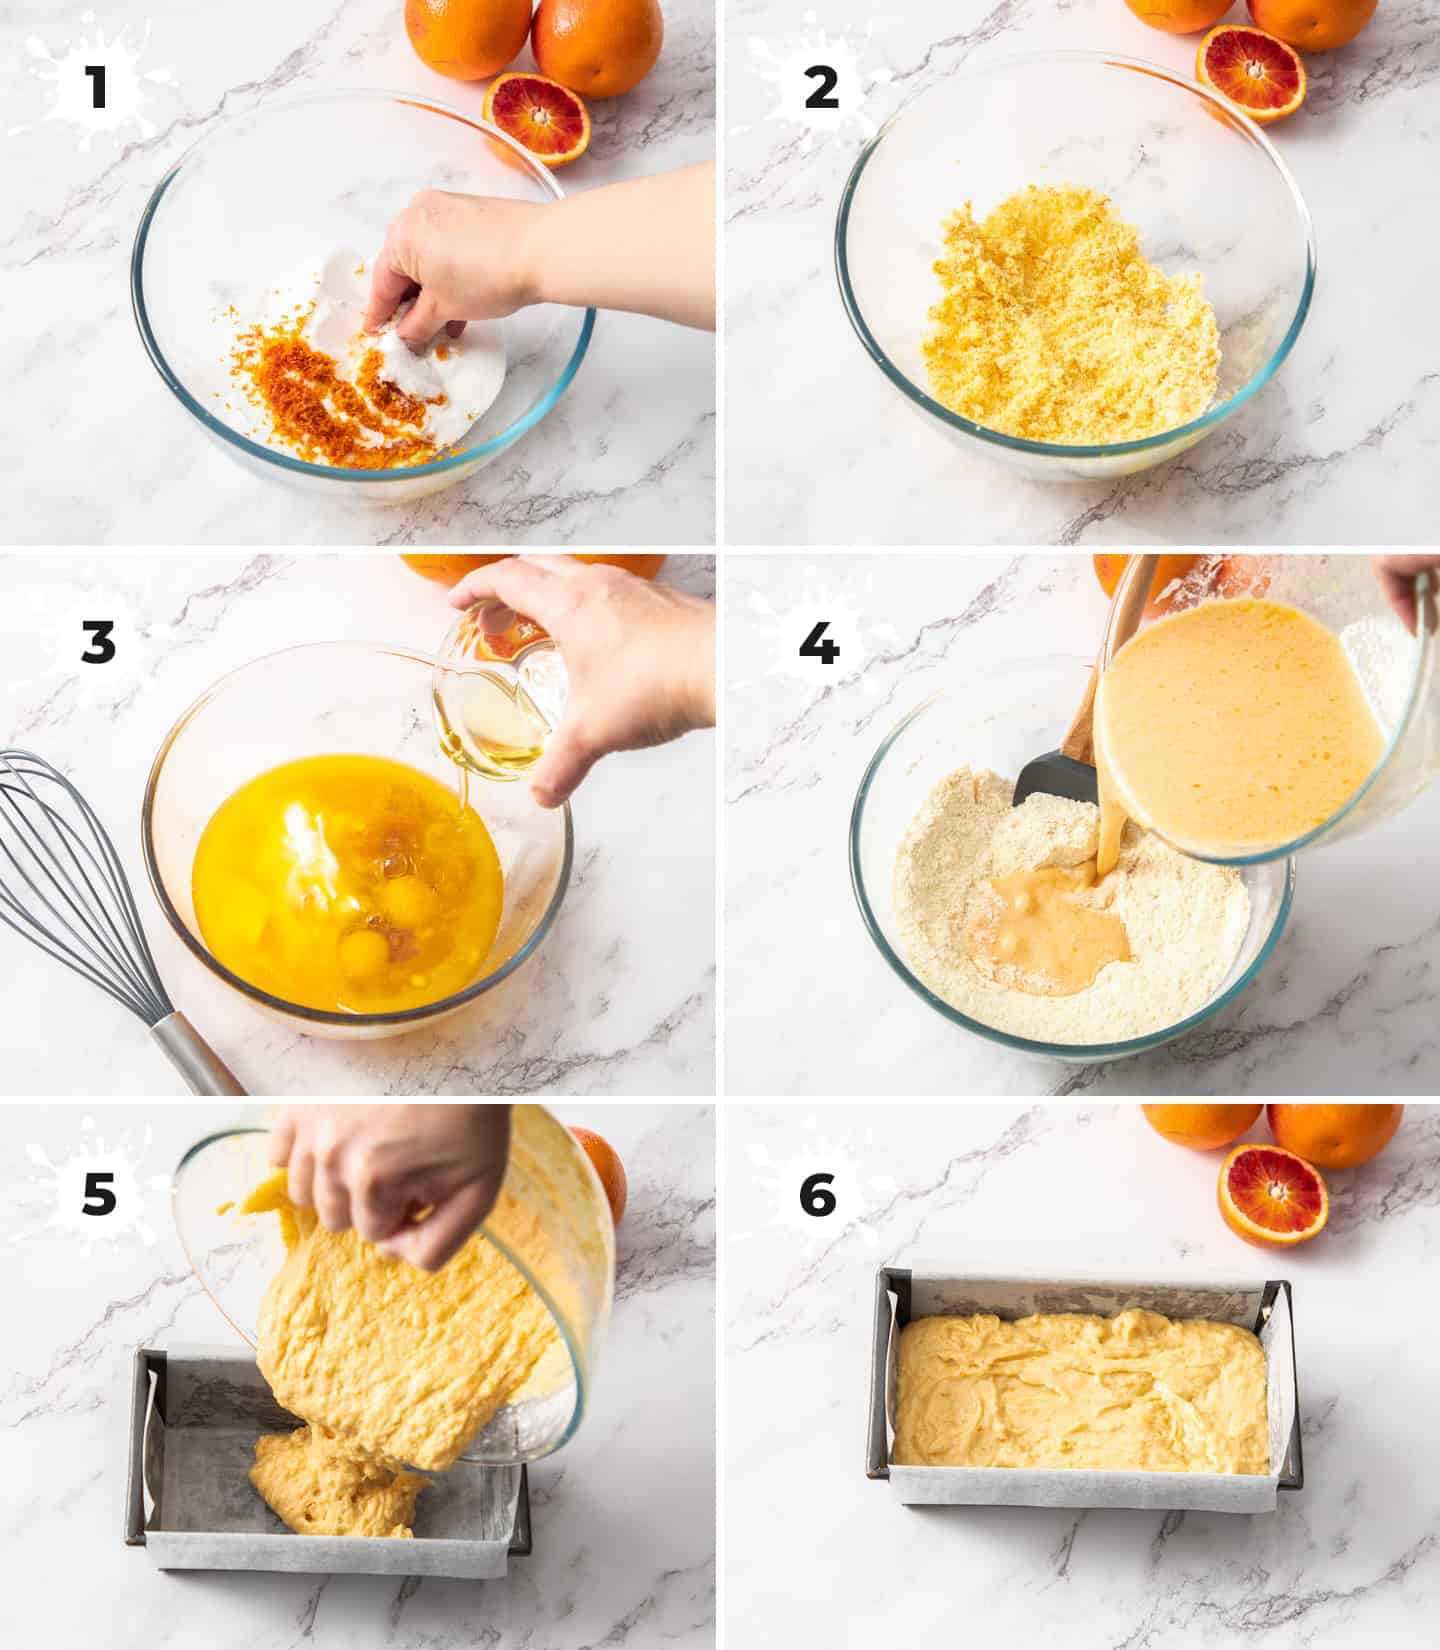 A collage of 6 images showing how to make the orange loaf cake.